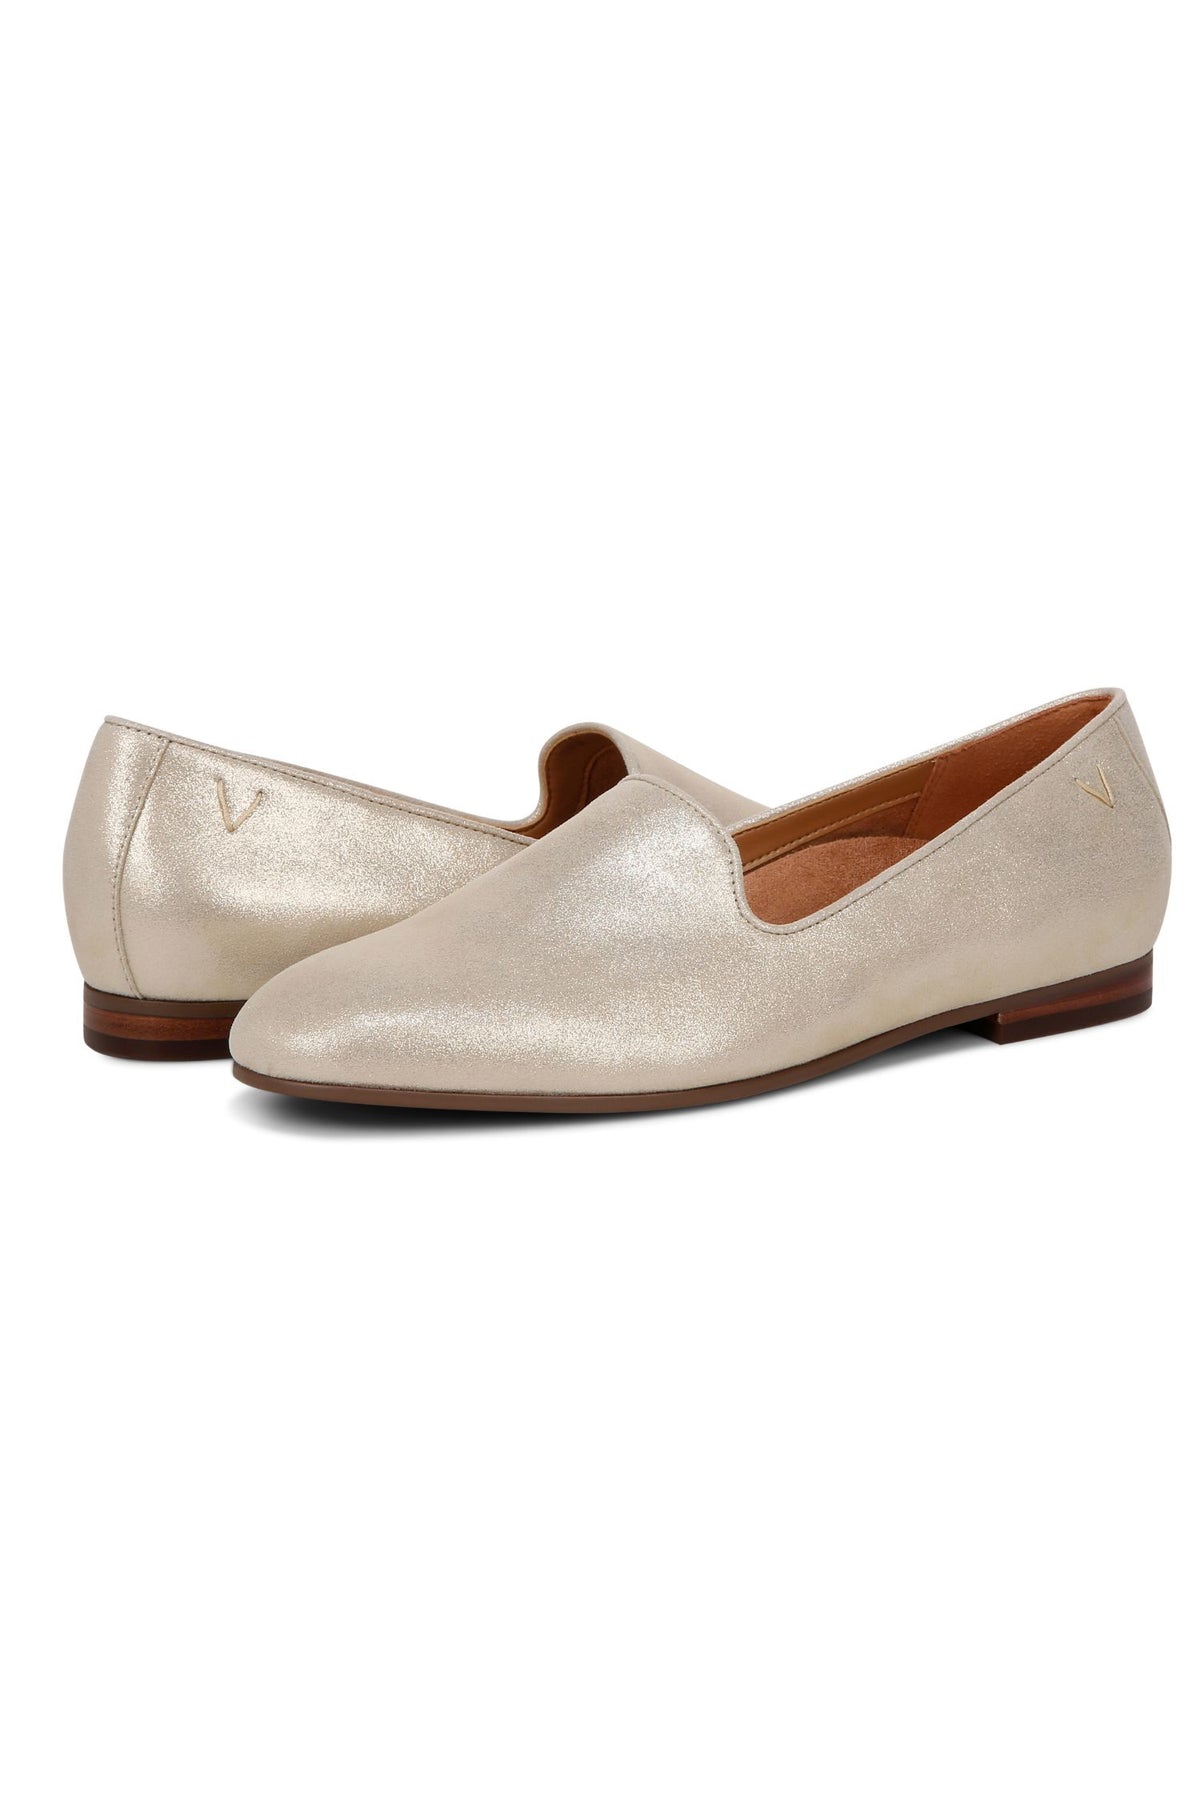 Vionic Flat Loafer - Style Willa 11, gold, pair